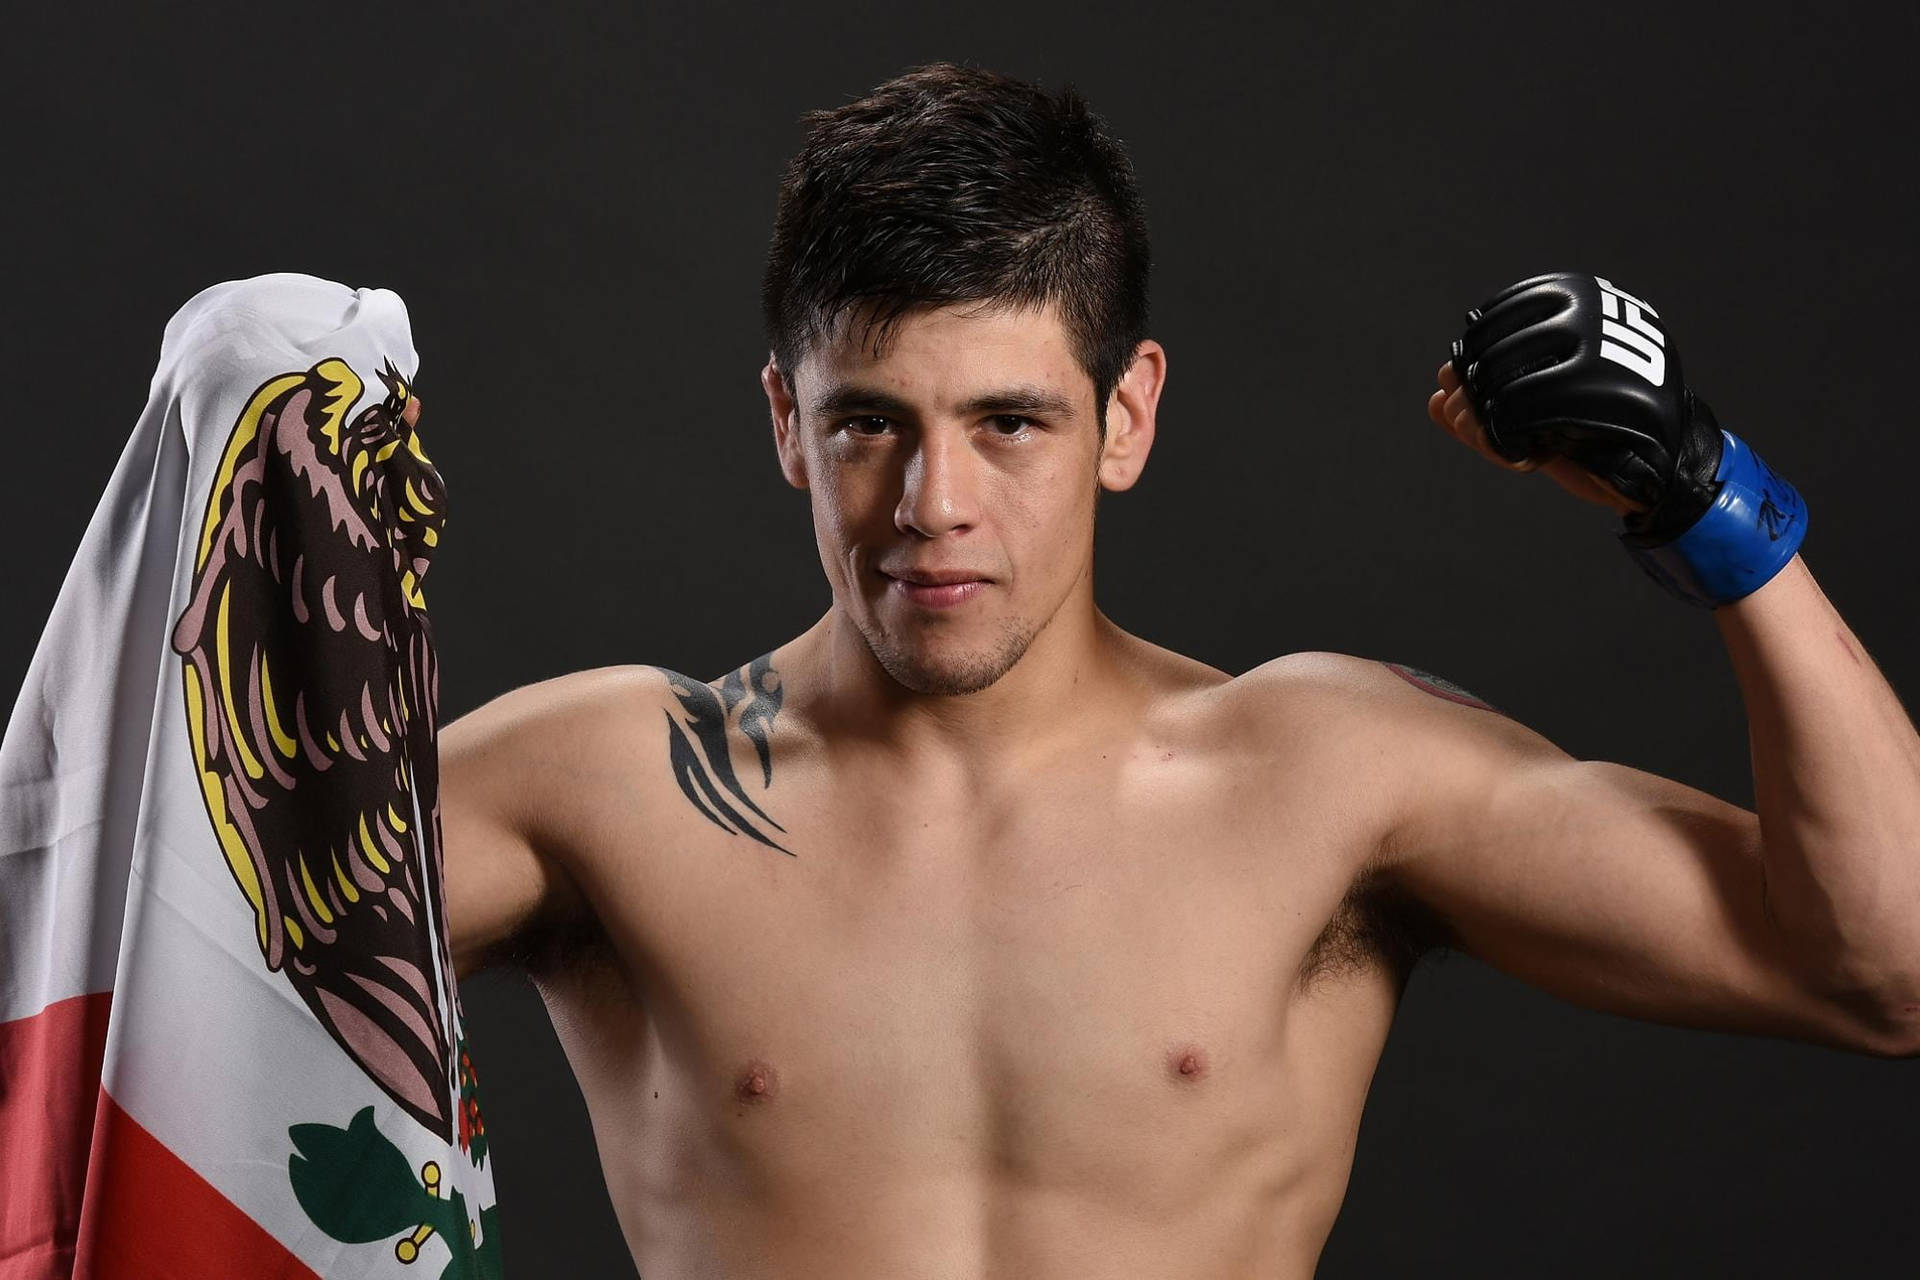 Victory pose of Brandon Moreno with the Mexican flag in the background Wallpaper